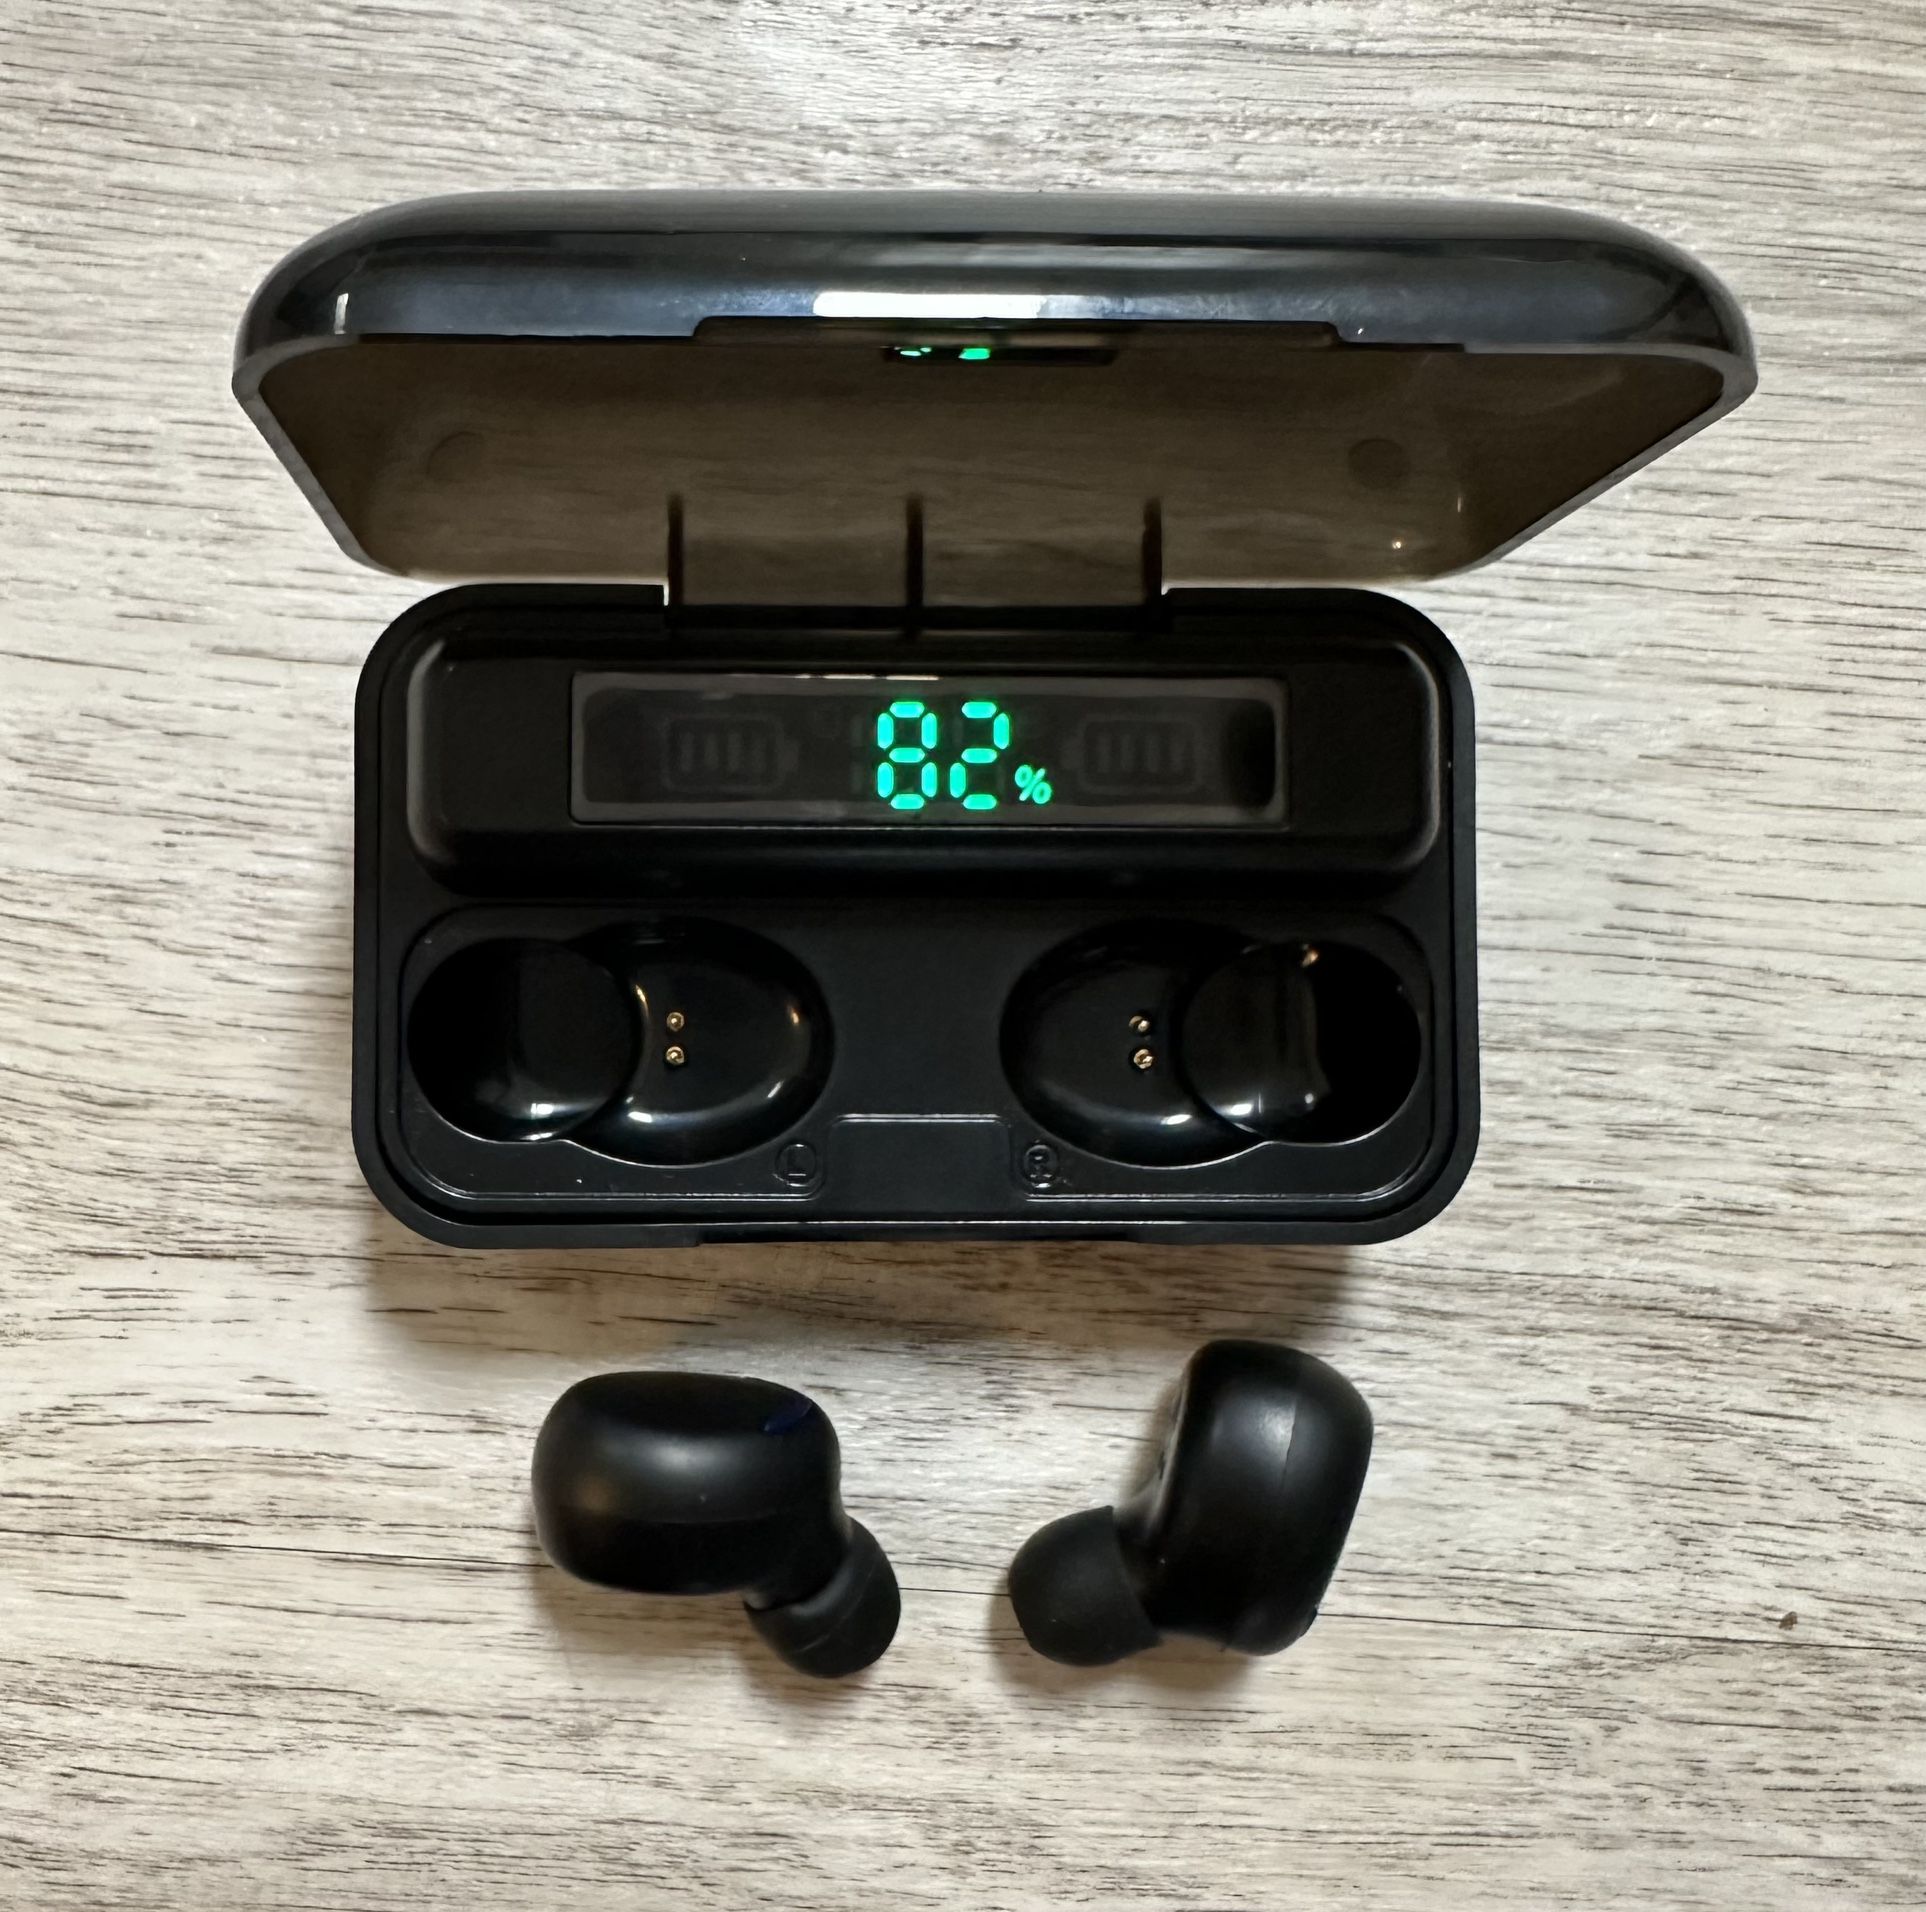 Black Bluetooth 5.0 Earbuds TWS Wireless Headphones Headset Stereo Samsung Android iPhone Earphone Gift.